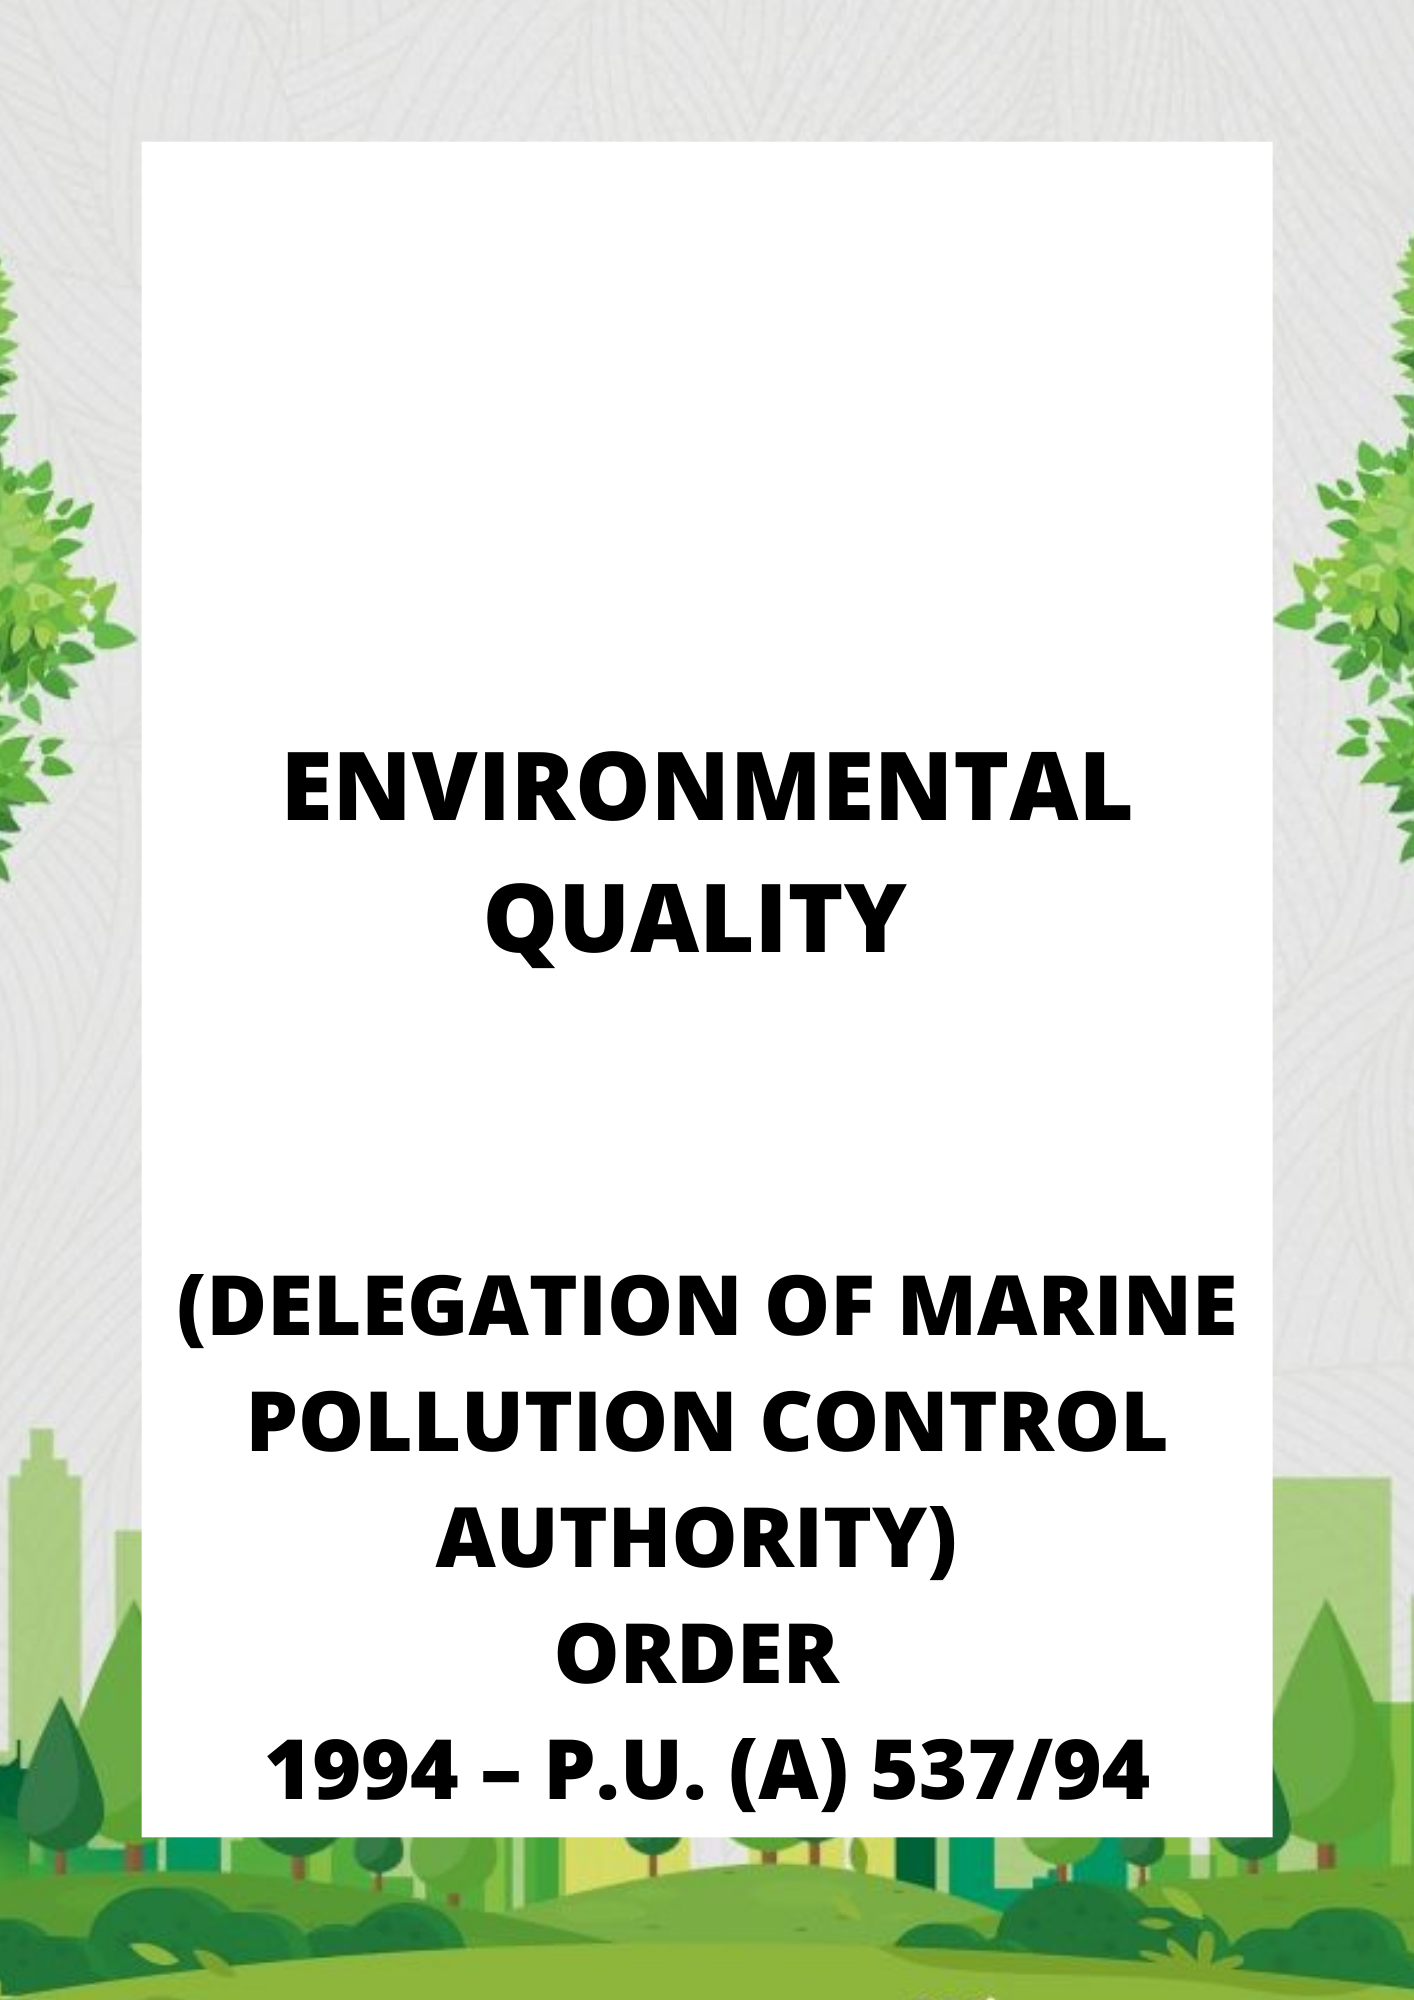 Environmental Quality (Delegation of Marine Pollution Control Authority) Order 1994 – P.U. (A) 53794